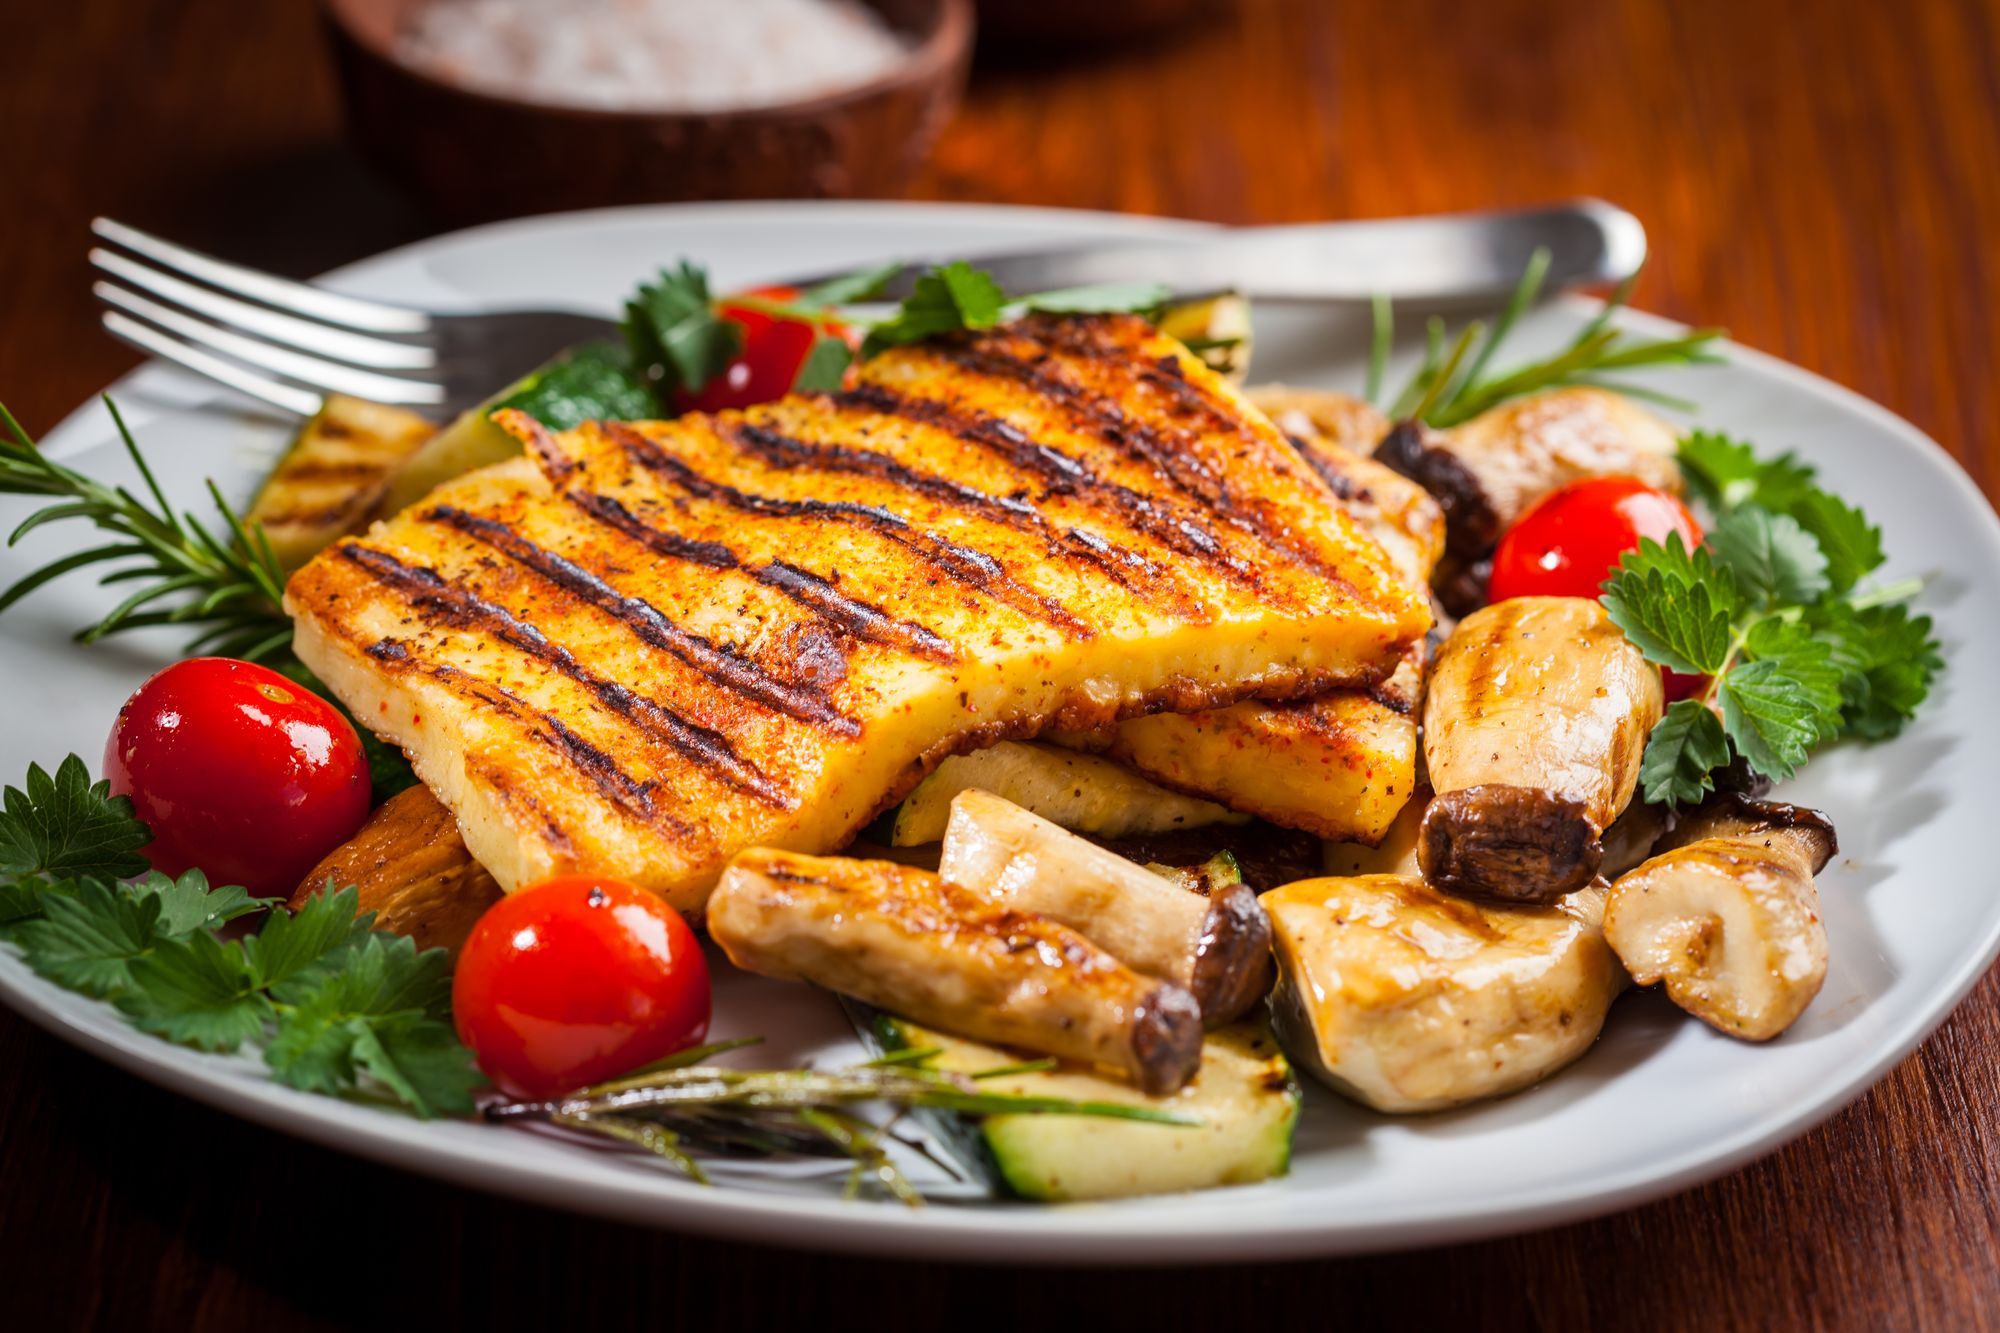 Chargrilled Halloumi and Vegetables